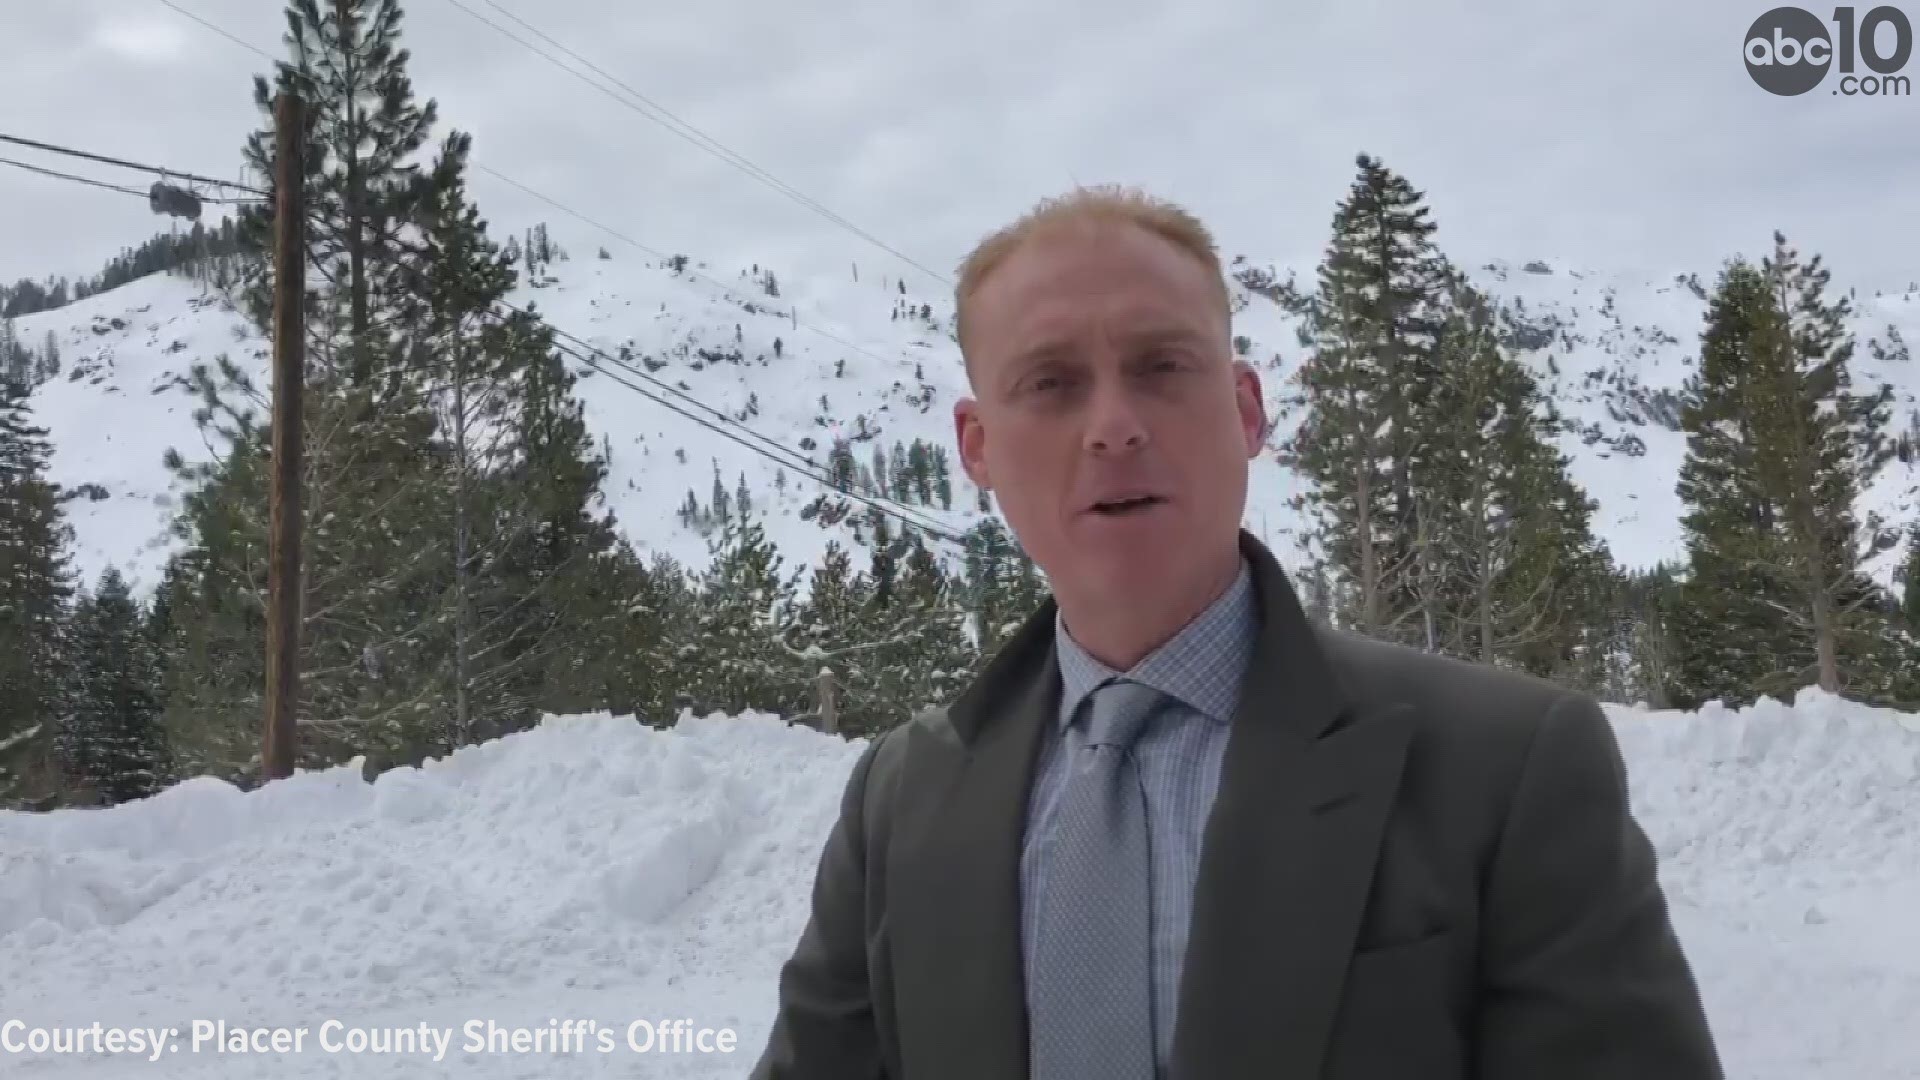 Sgt. Powers with the Placer County Sheriff's Department confirms one person has died while another was injured in an avalanche at Alpine Meadows.